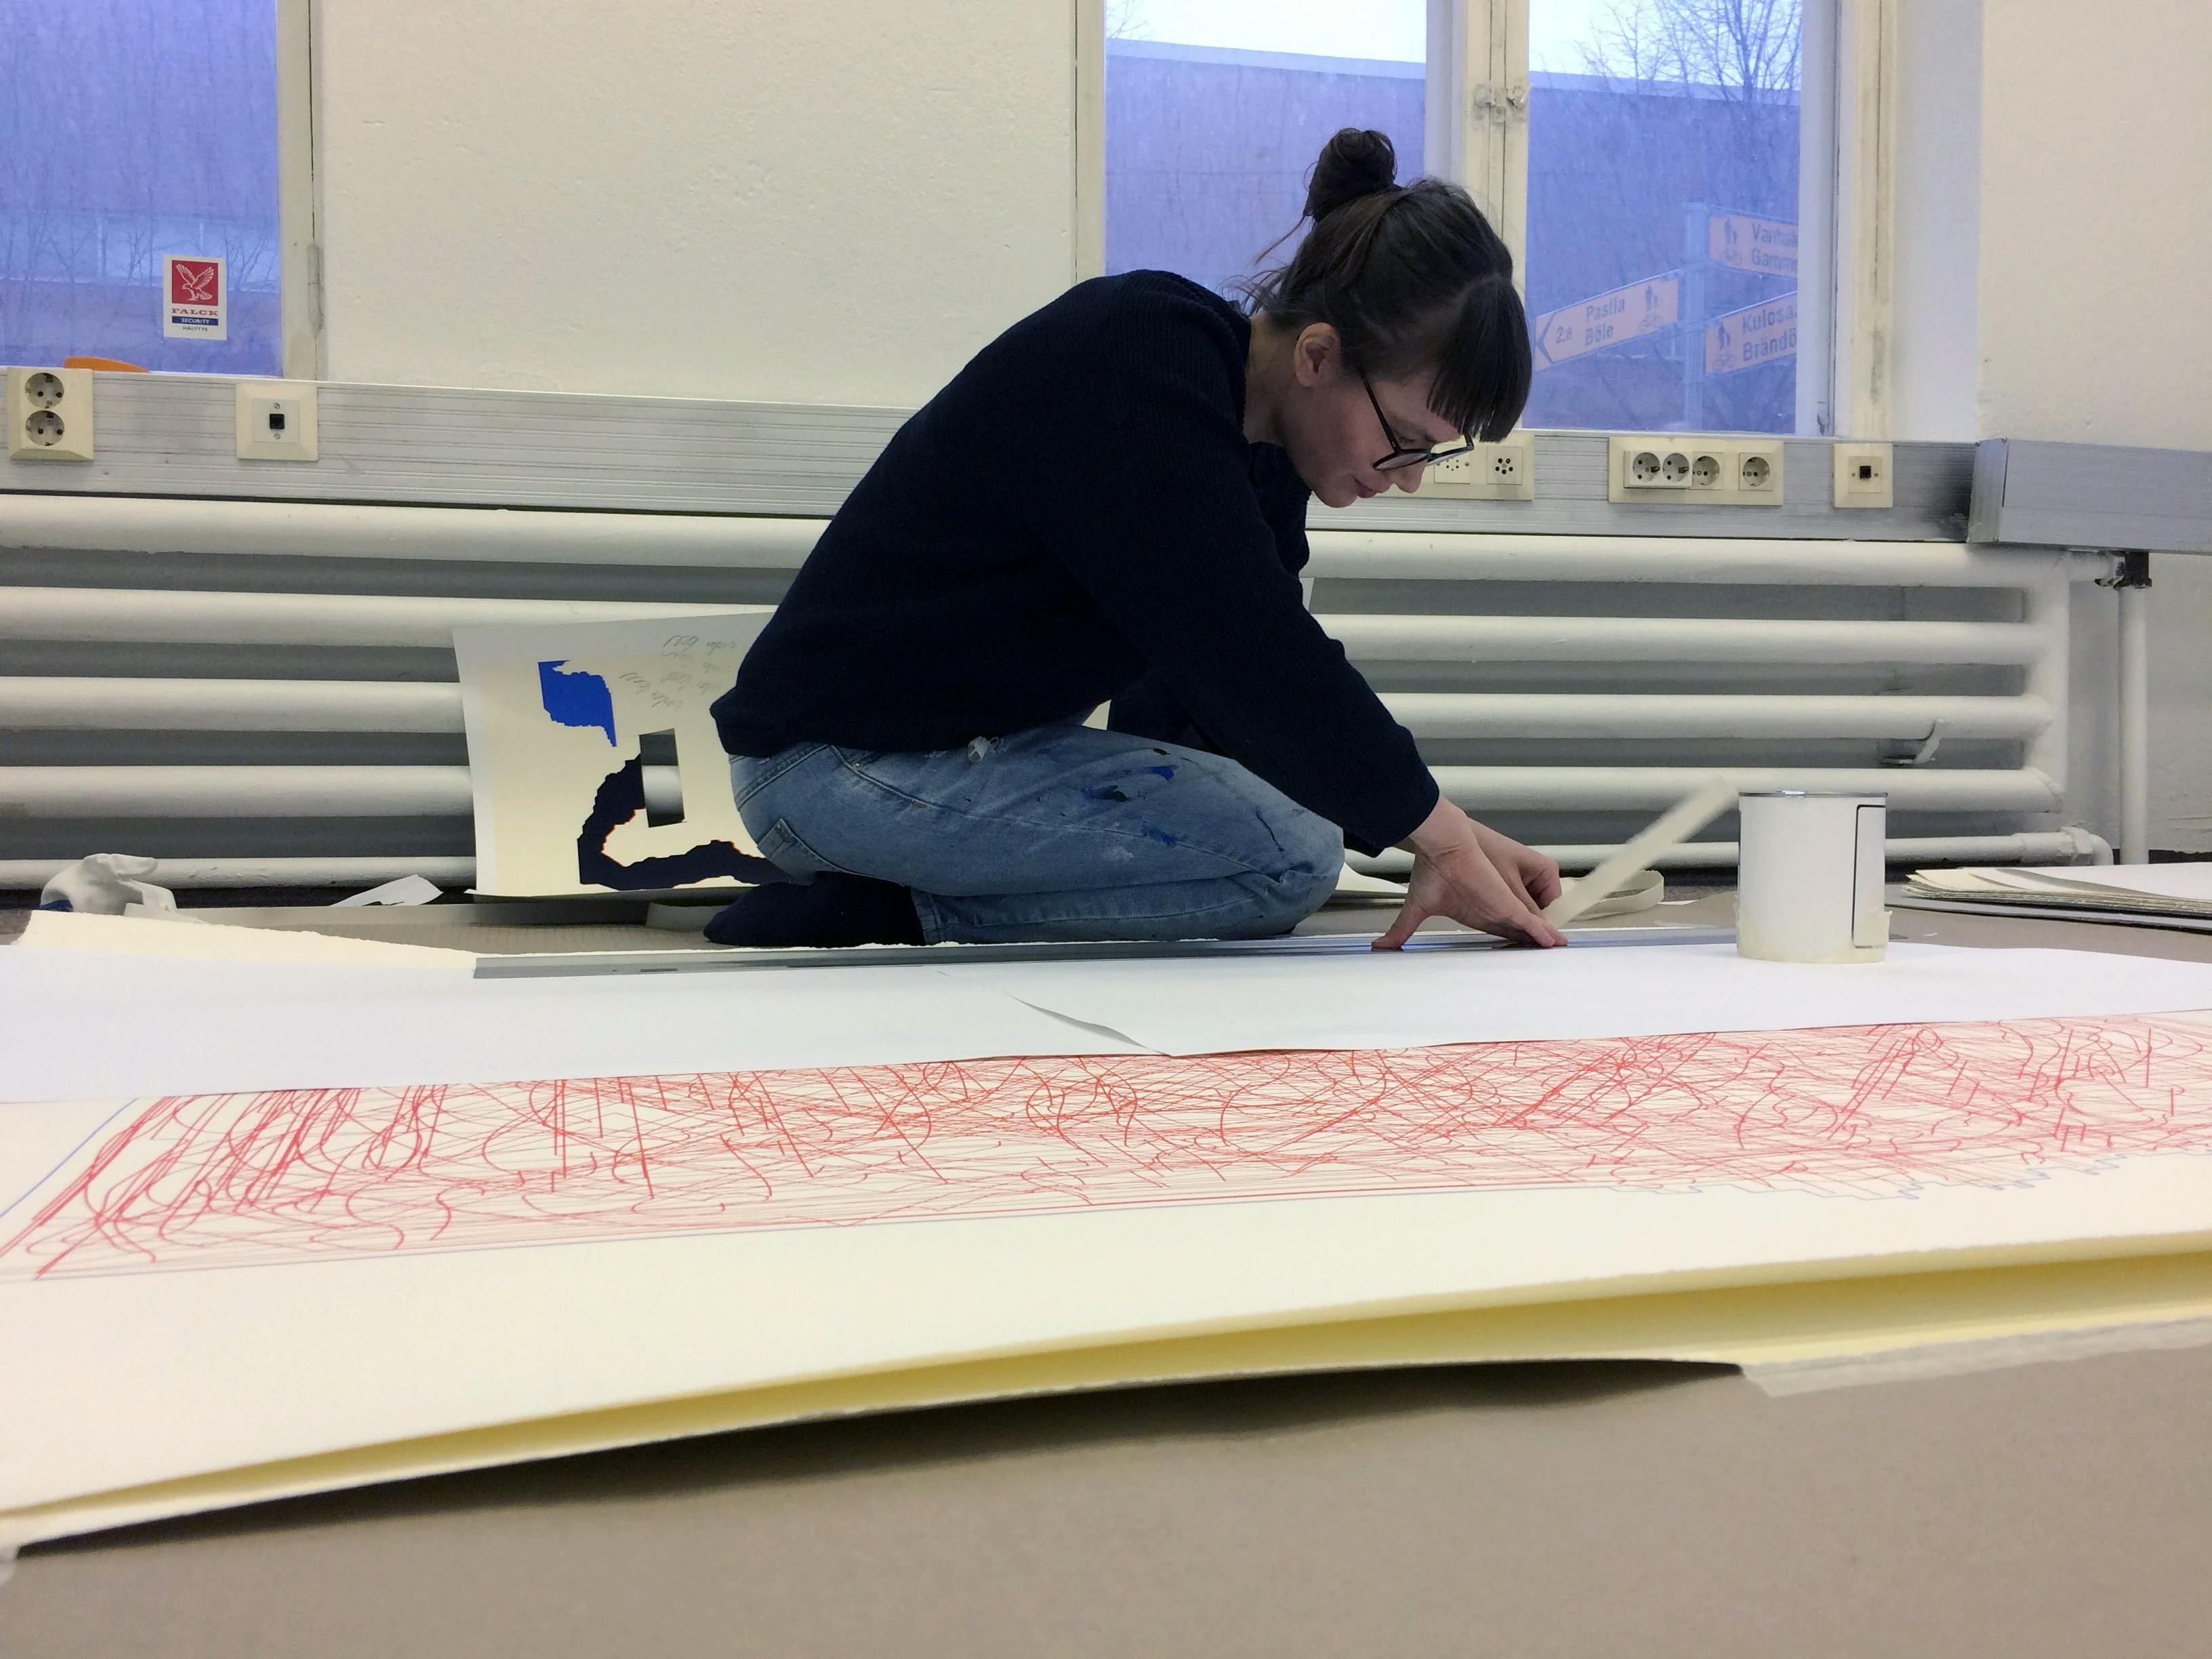 Artist Inka Bell crouching on the floor and working on a large print in her Helsinki studio.